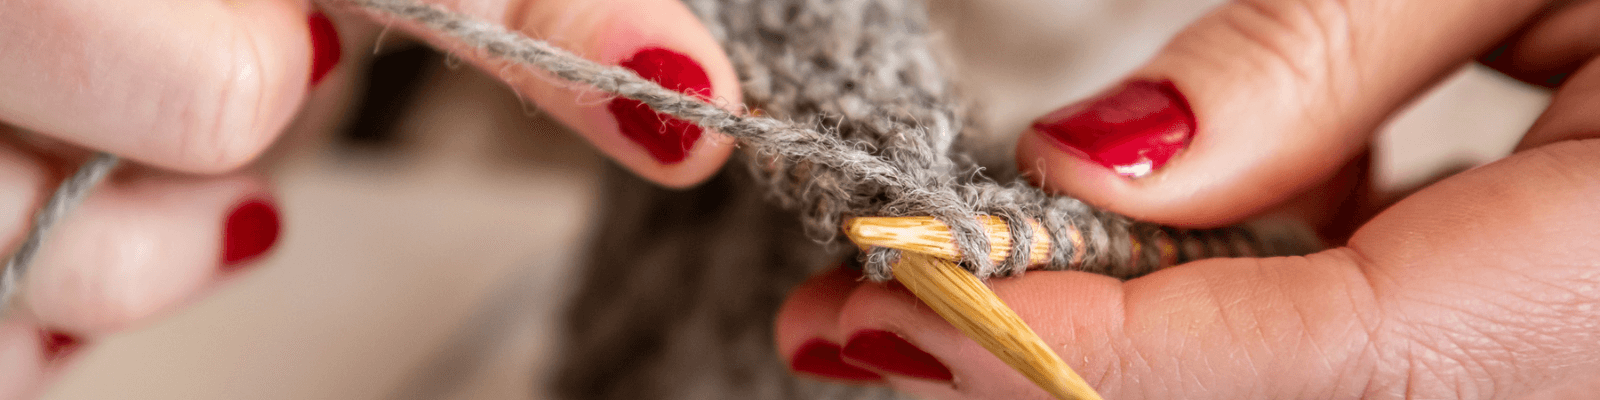 https://www.airfield.ie/wp-content/uploads/2021/04/Knitting-at-Airfield-Estate-1.png